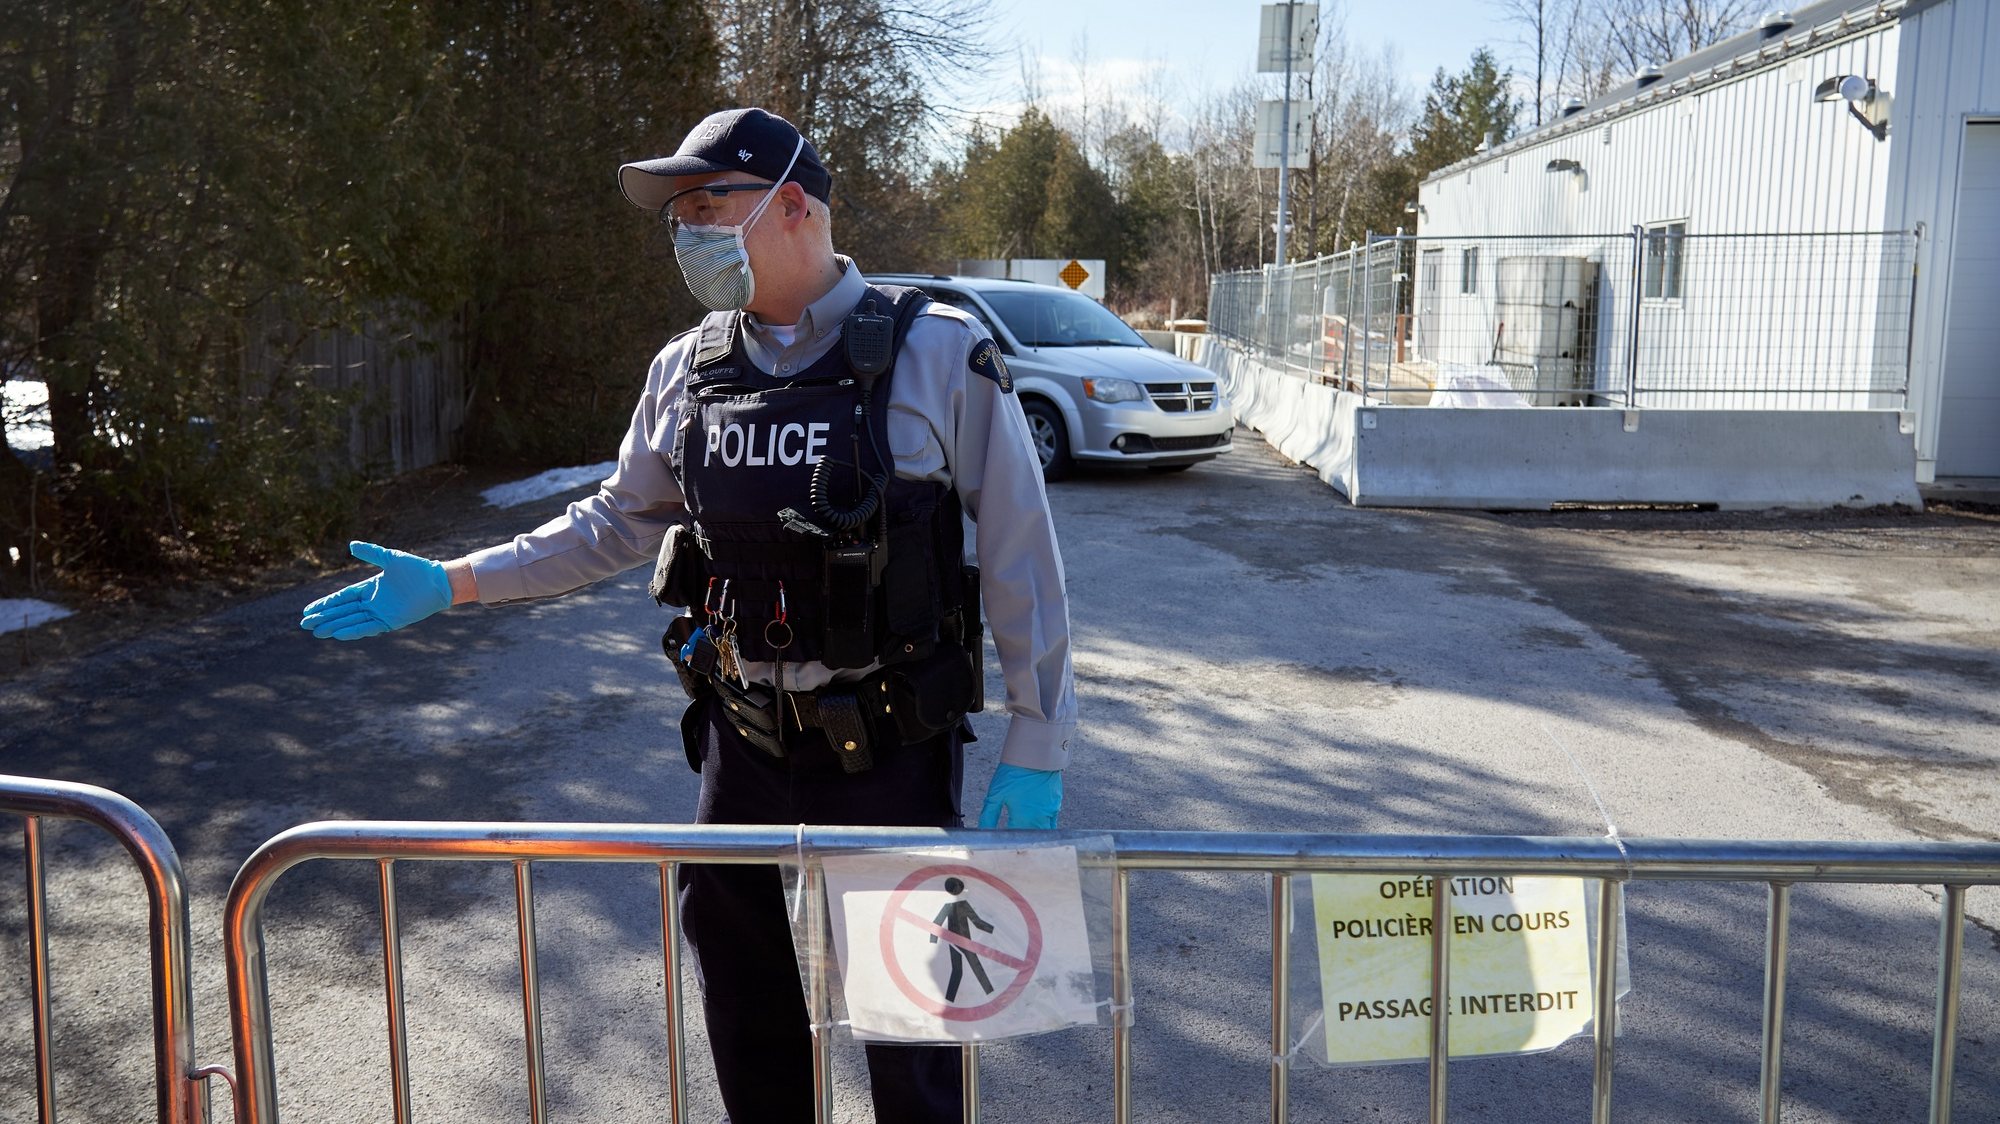 epa08310226 Canadian federal police (RCMP) officer on guard at Roxham road at Saint-Bernard-de-Lacolle, Quebec, Canada, 20 March 2020. US President Donald J. Trump and Canadian Prime Minster Justin Trudeau announced on 20 March that the Canadian-US border will be closed to non-essential traffic to slow the spread of the COVID-19 coronavirus pandemic. Countries around the world are taking increased measures to stem the widespread of the SARS-CoV-2 coronavirus which causes the Covid-19 disease.  EPA/ANDRE PICHETTE